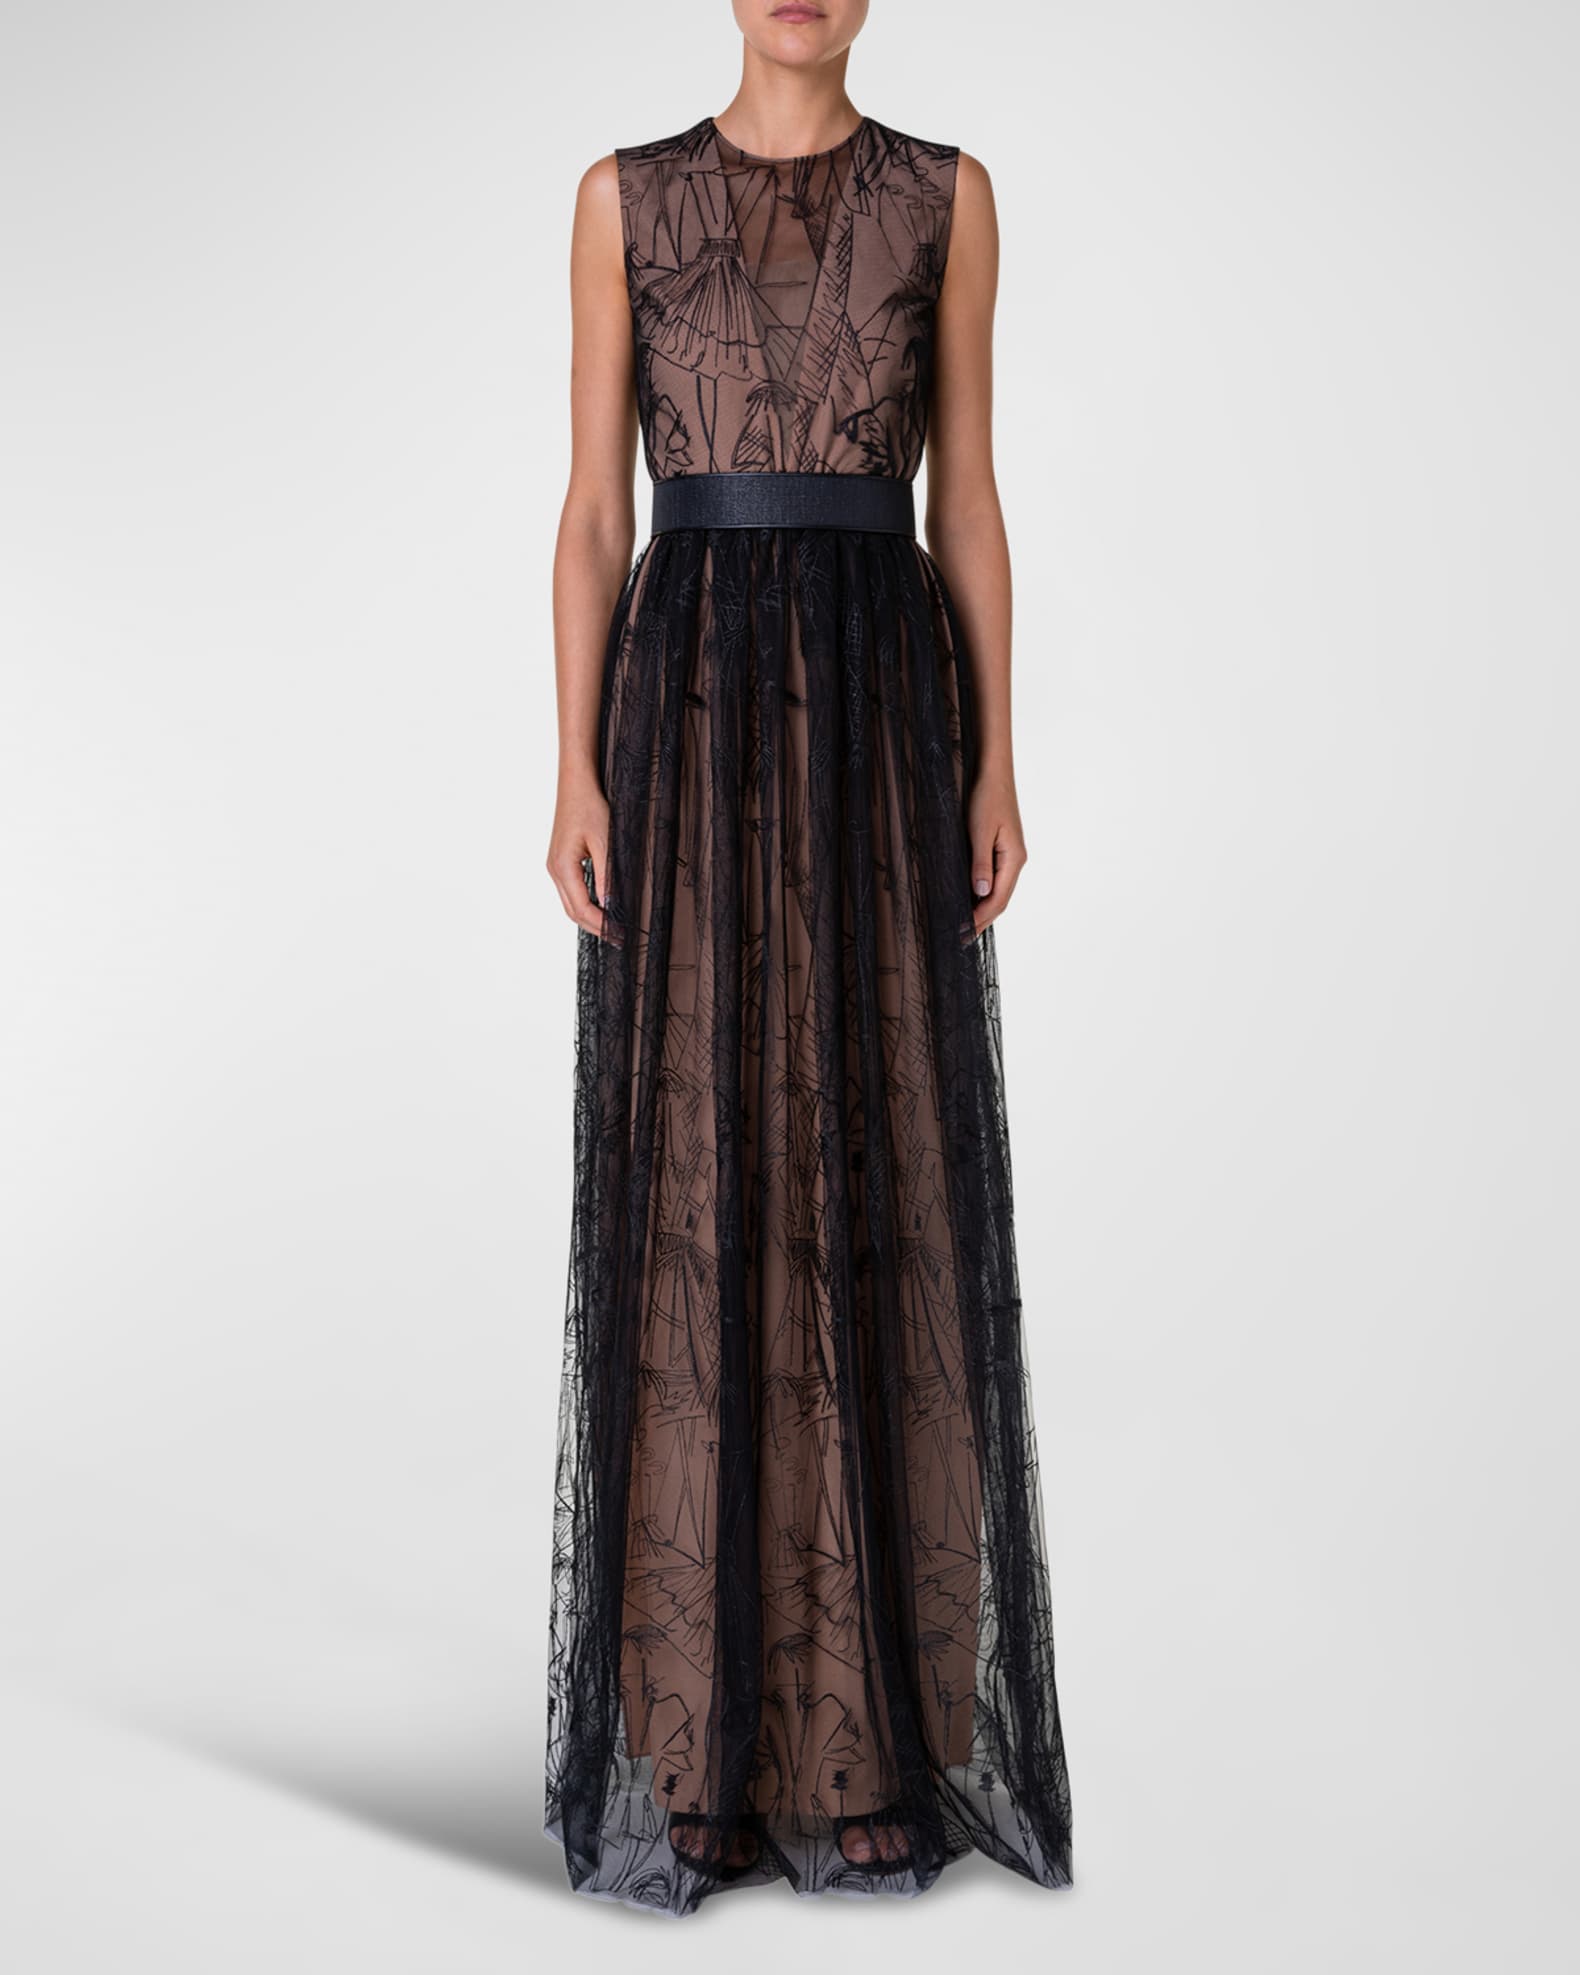 Akris Belted Tulle Gown with Croquis Embroidered Details | Neiman Marcus